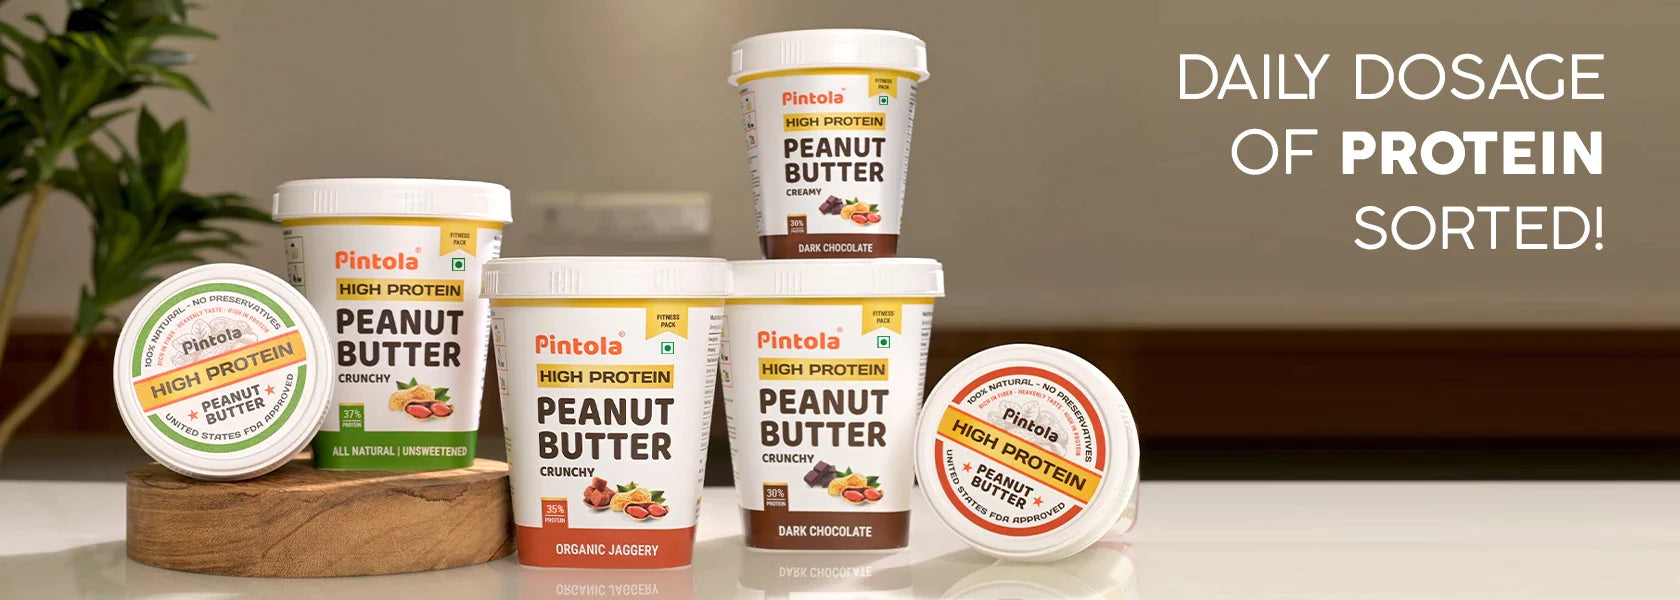 Pintola HIGH Protein Peanut Butter Range with Added Whey Protein.  High in protein and fibre, and ZERO in trans fat